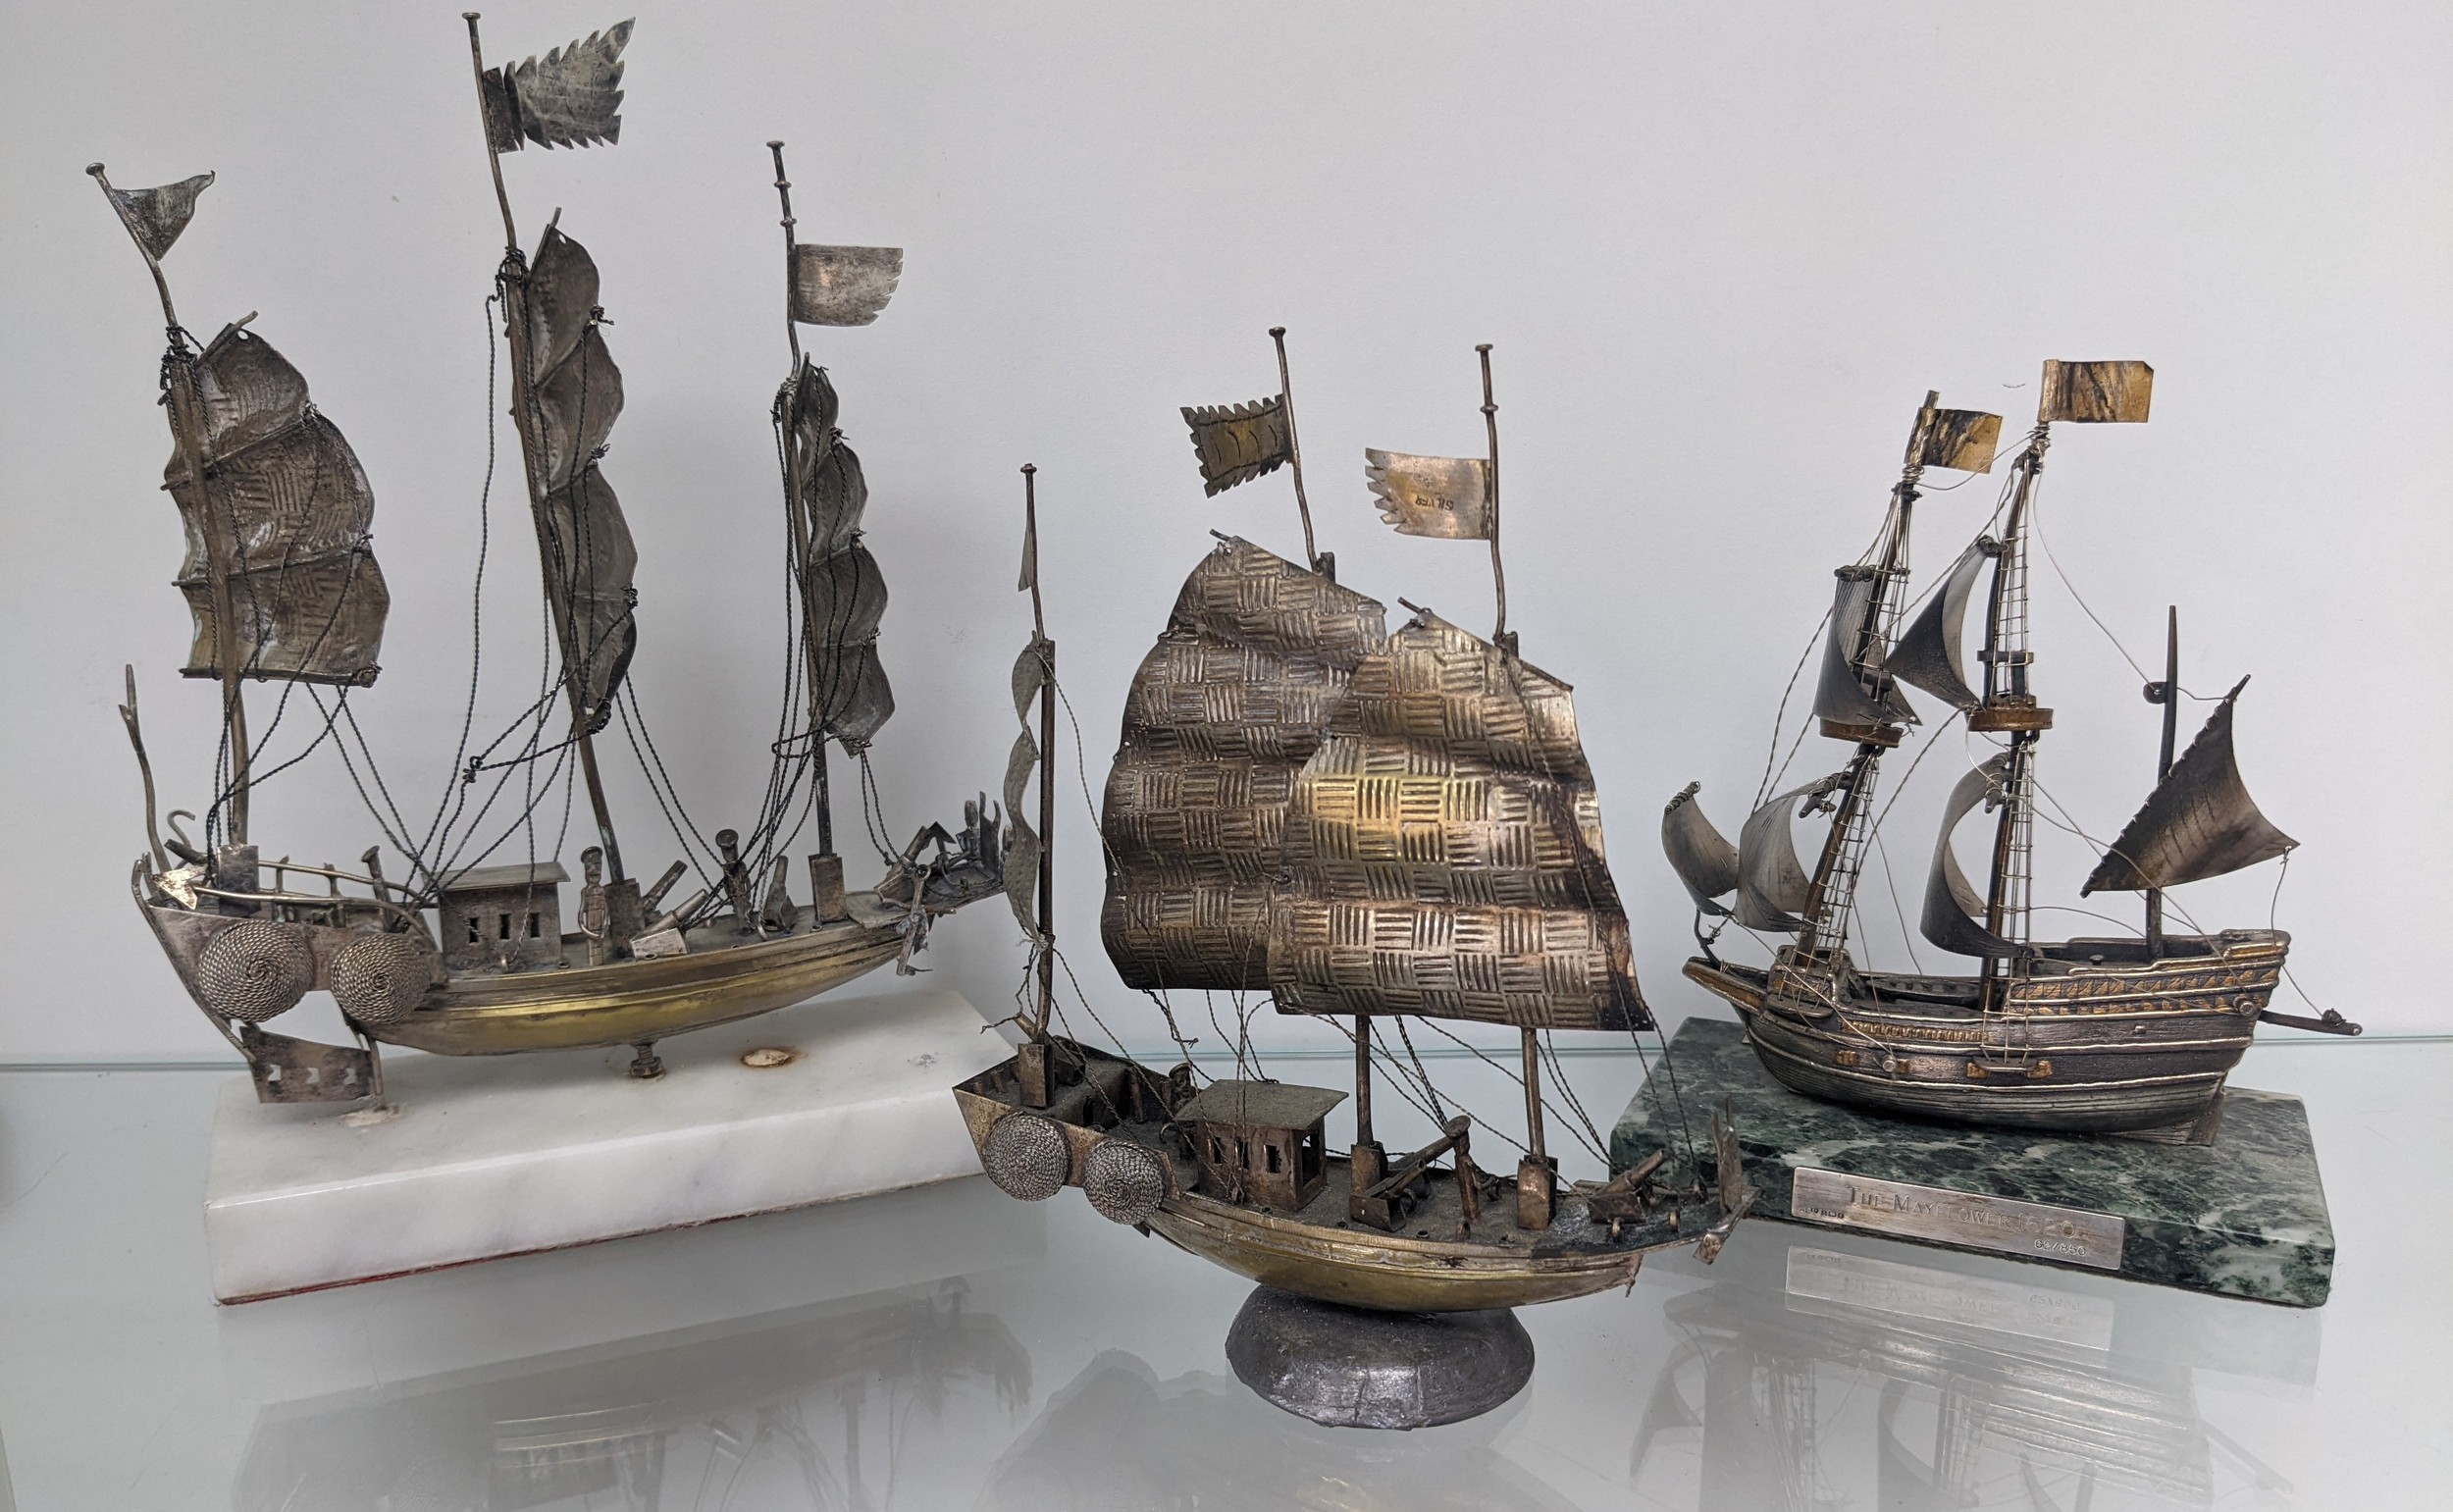 Birmingham silver Chinese ship model 'The Mayflower 1620' [62/850] 'Presented to J. Gillespie On